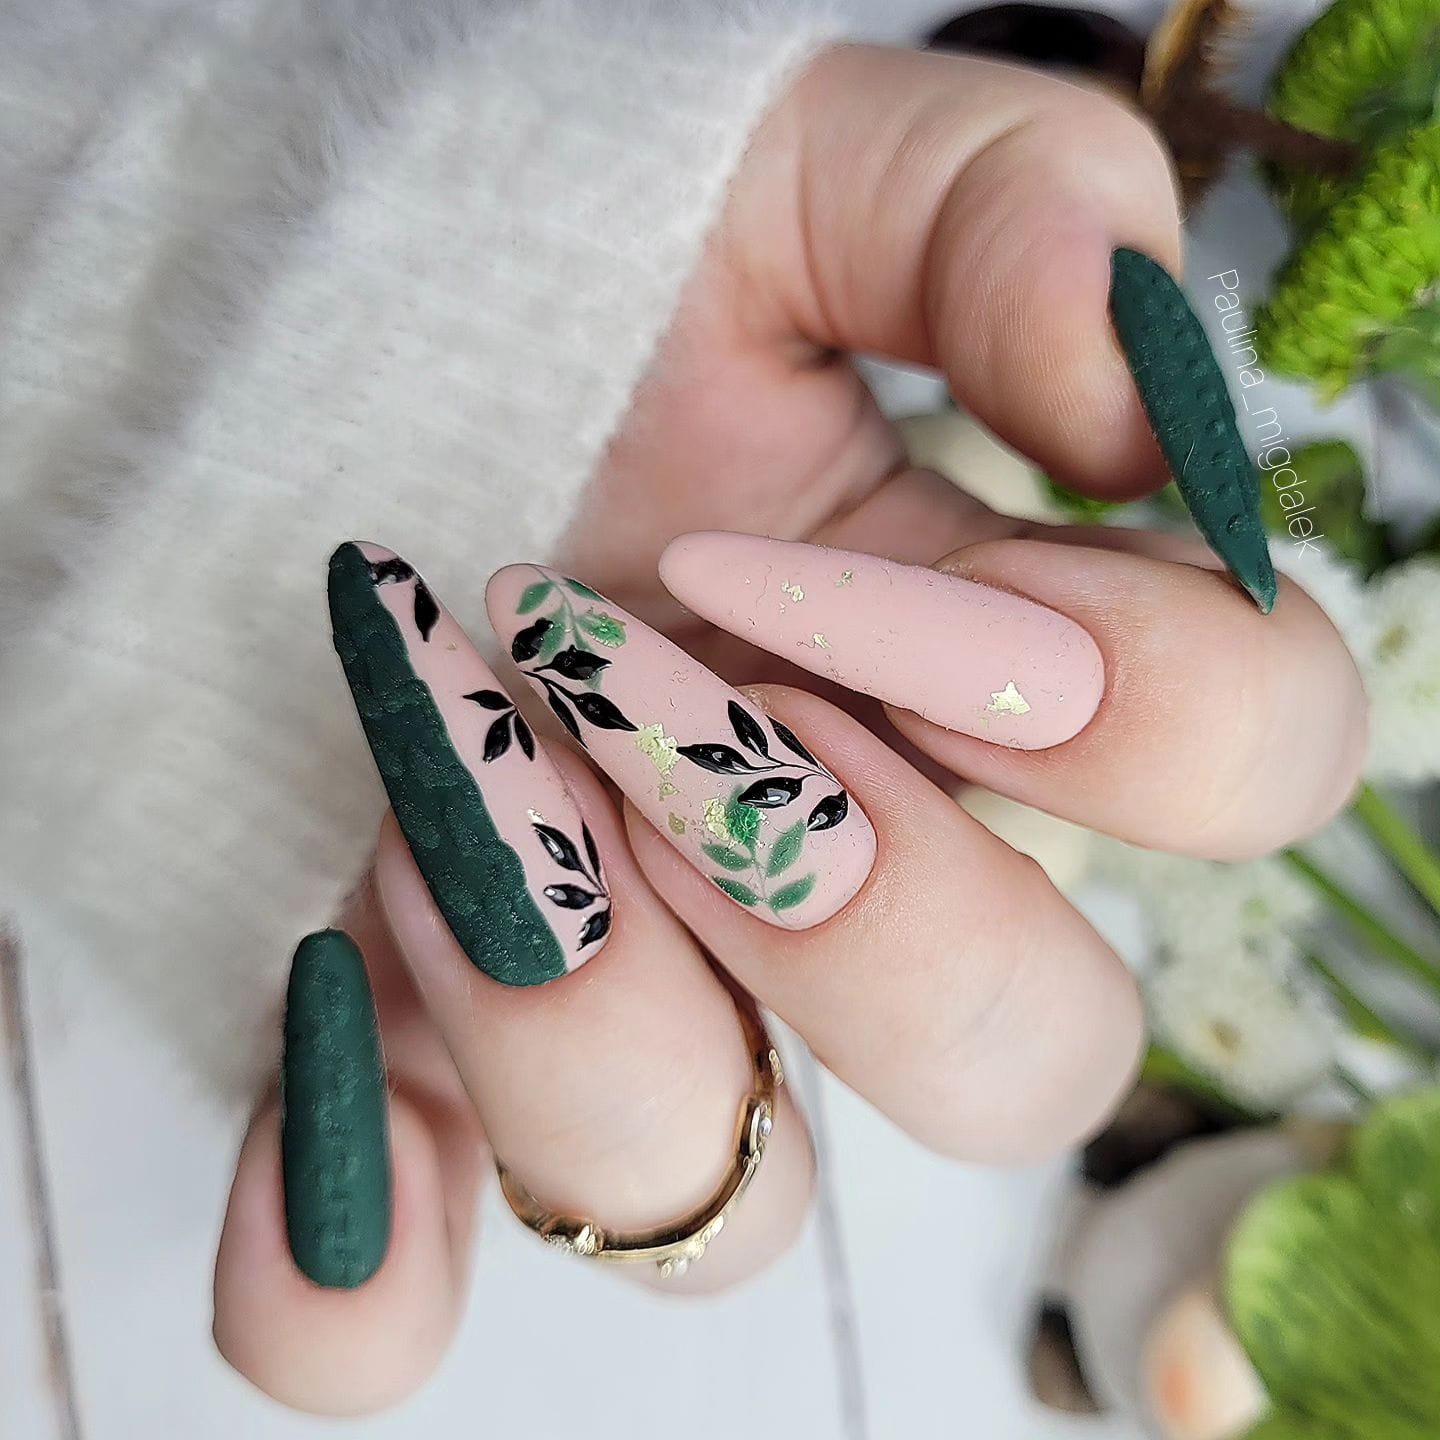 100+ Best Winter Nail Ideas And Designs To Try images 27